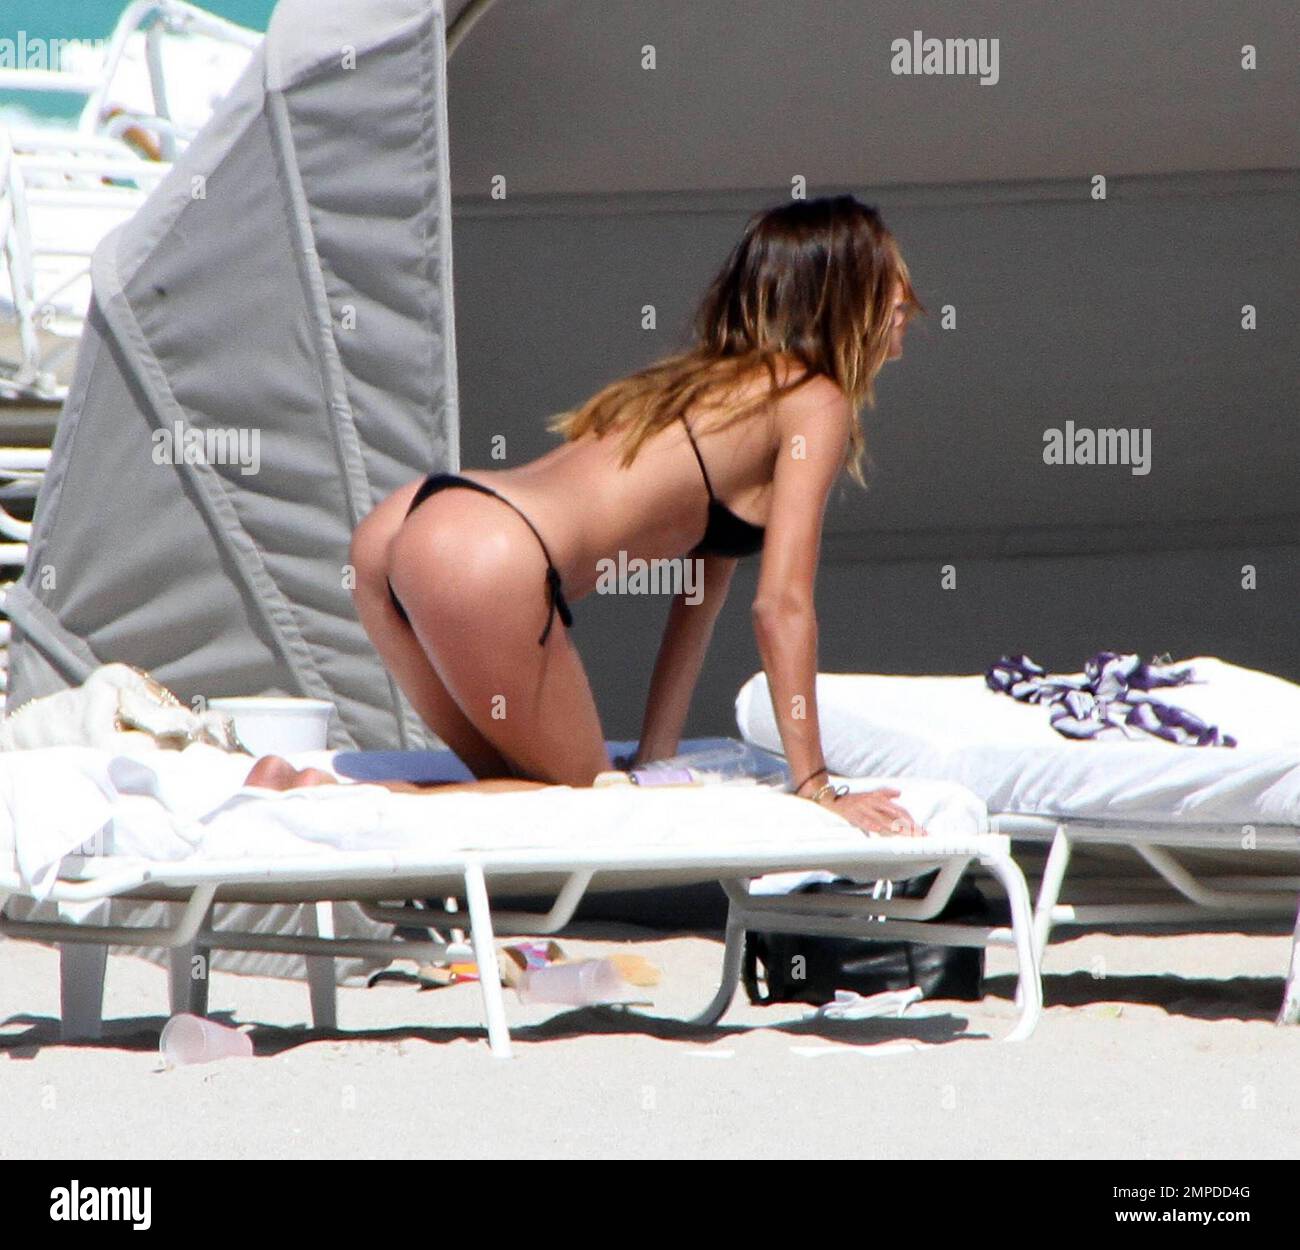 Bikini babe Belen Rodriguez appeared to have another bikini malfunction for the second day in a row. Yesterday her top had come adrift and today it seems her bottoms wouldn't behave. The Italian/Argentinian model relaxed beachside with pals and played in the surf. Miami, FL. 3/7/10. Stock Photo